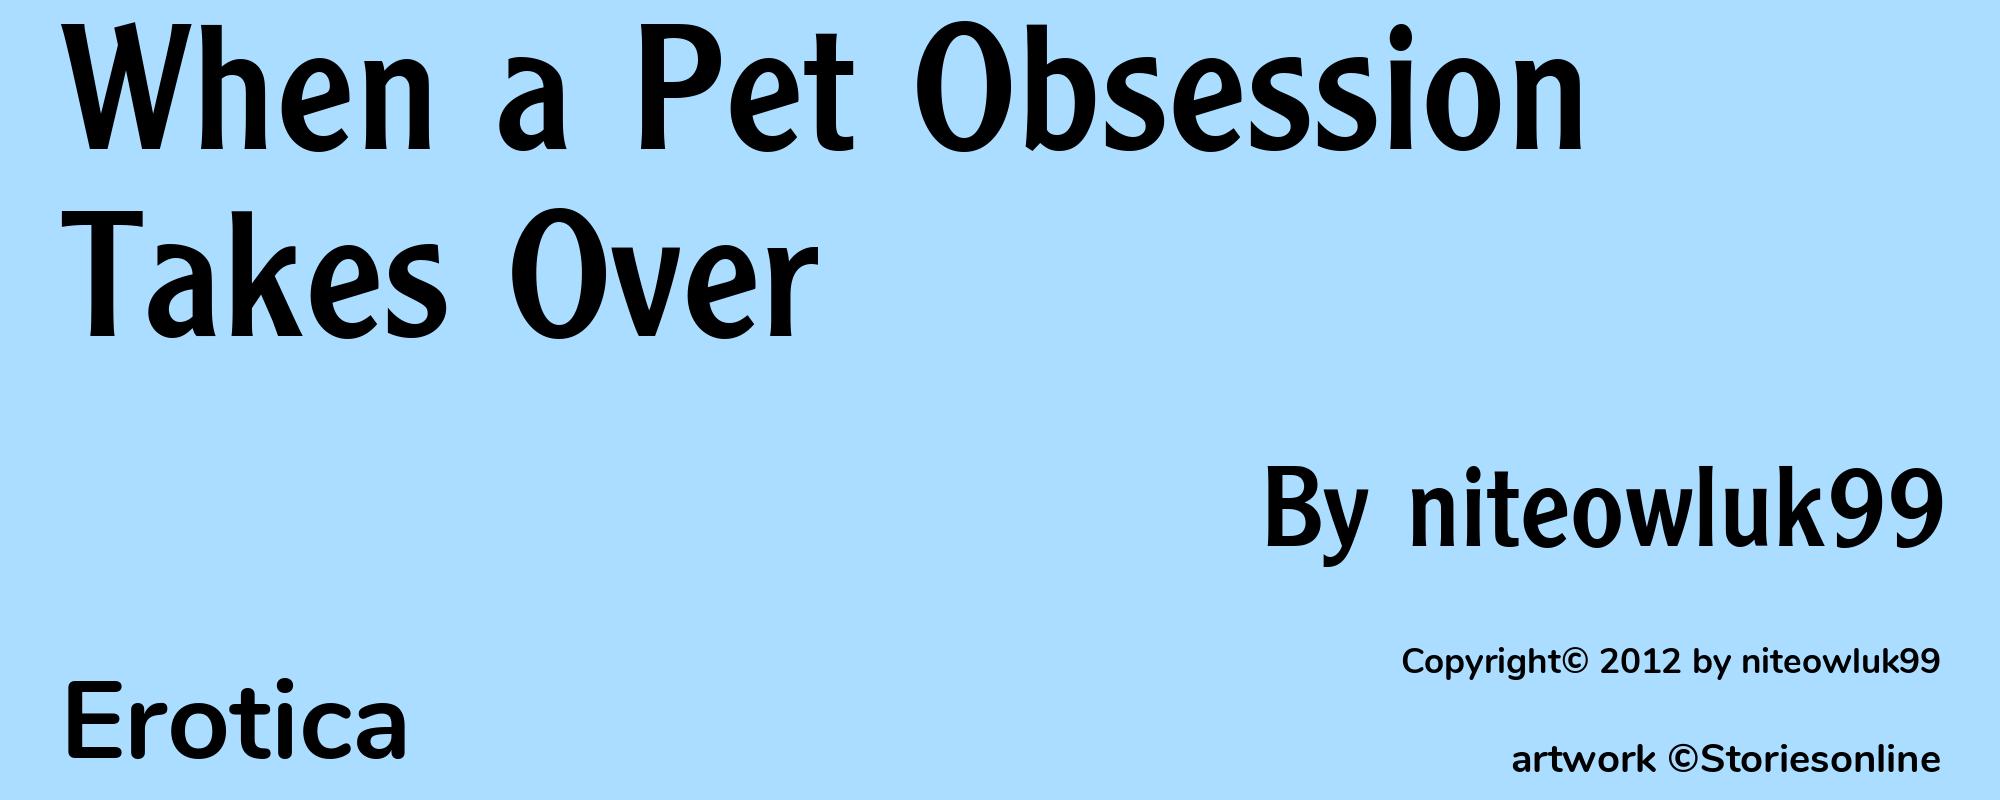 When a Pet Obsession Takes Over - Cover